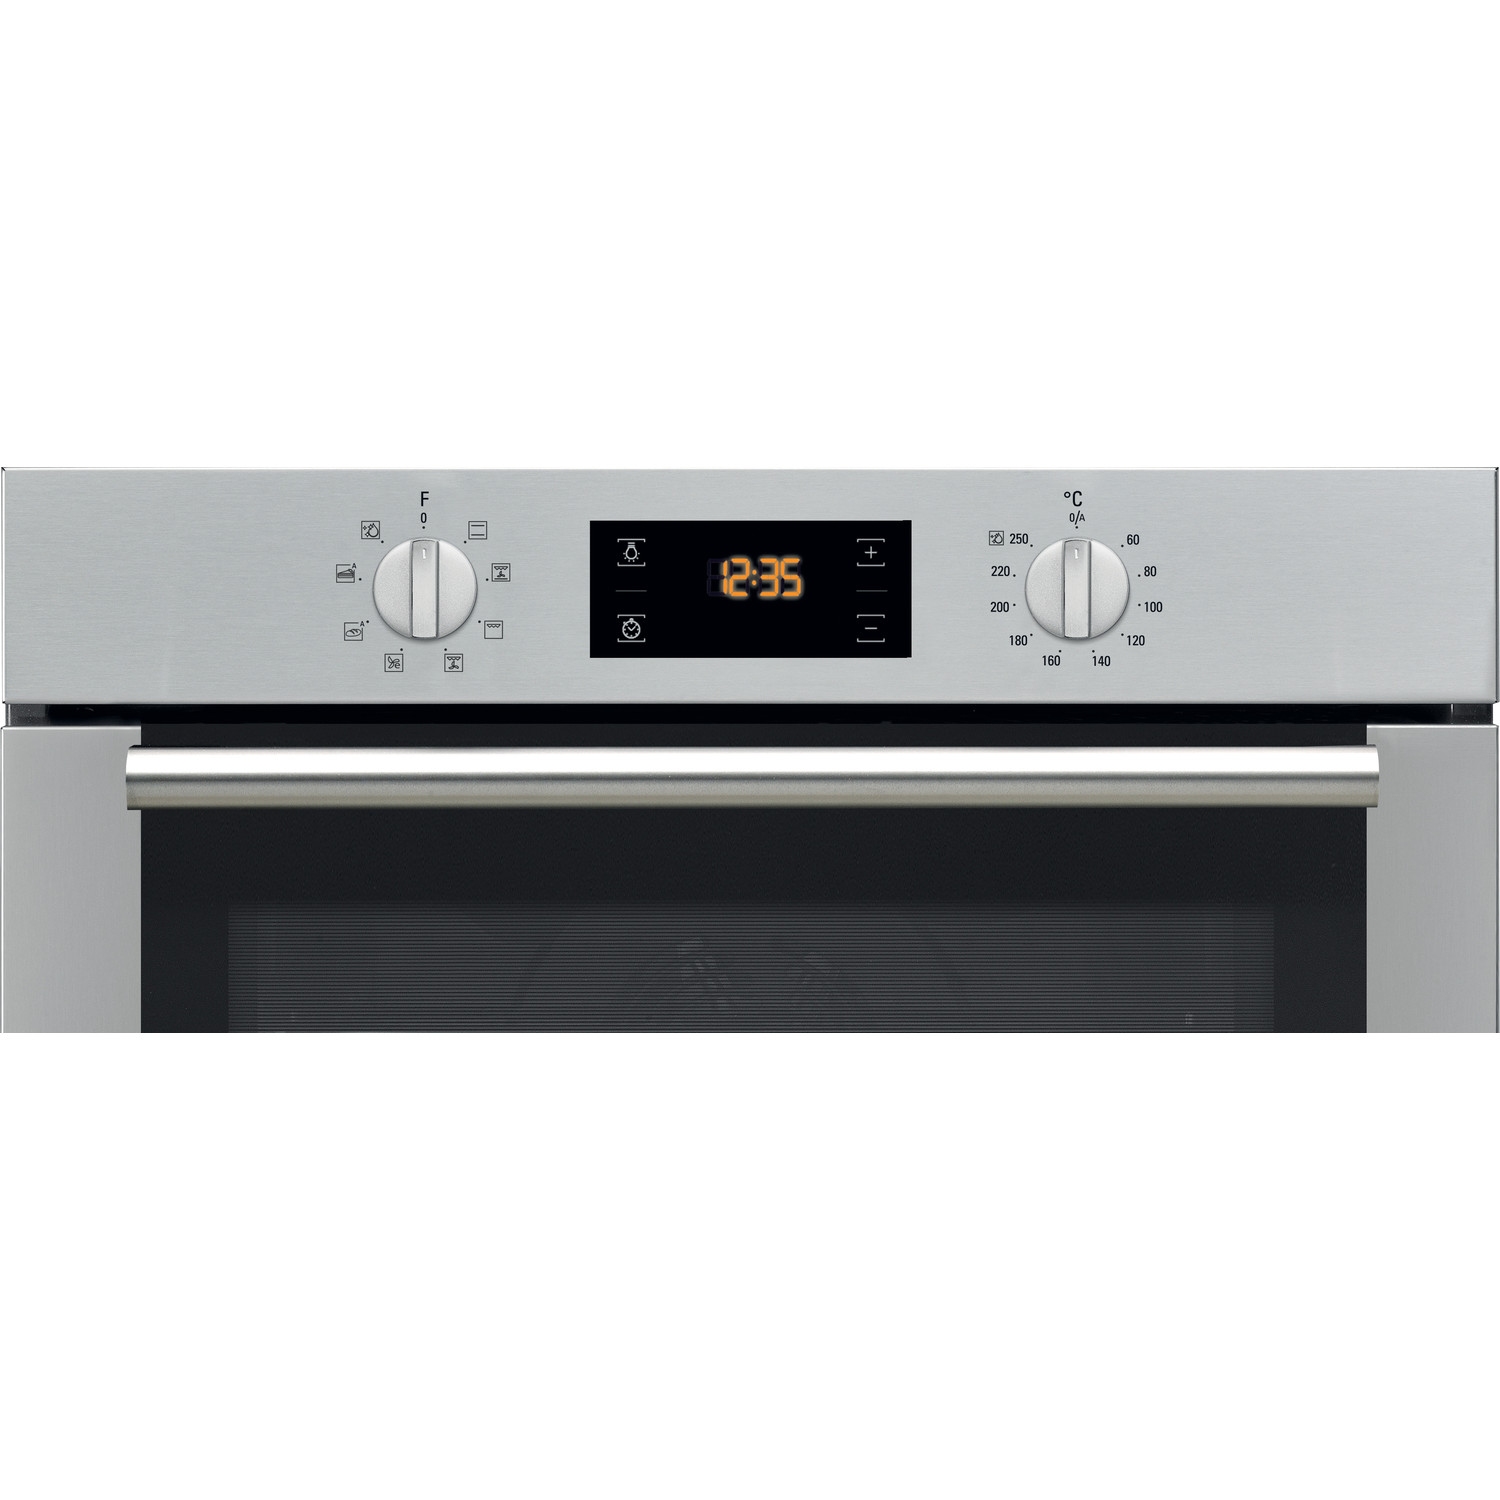 Hotpoint SA4544CIX 59.5cm Built In Electric Single Oven - Silver - 3